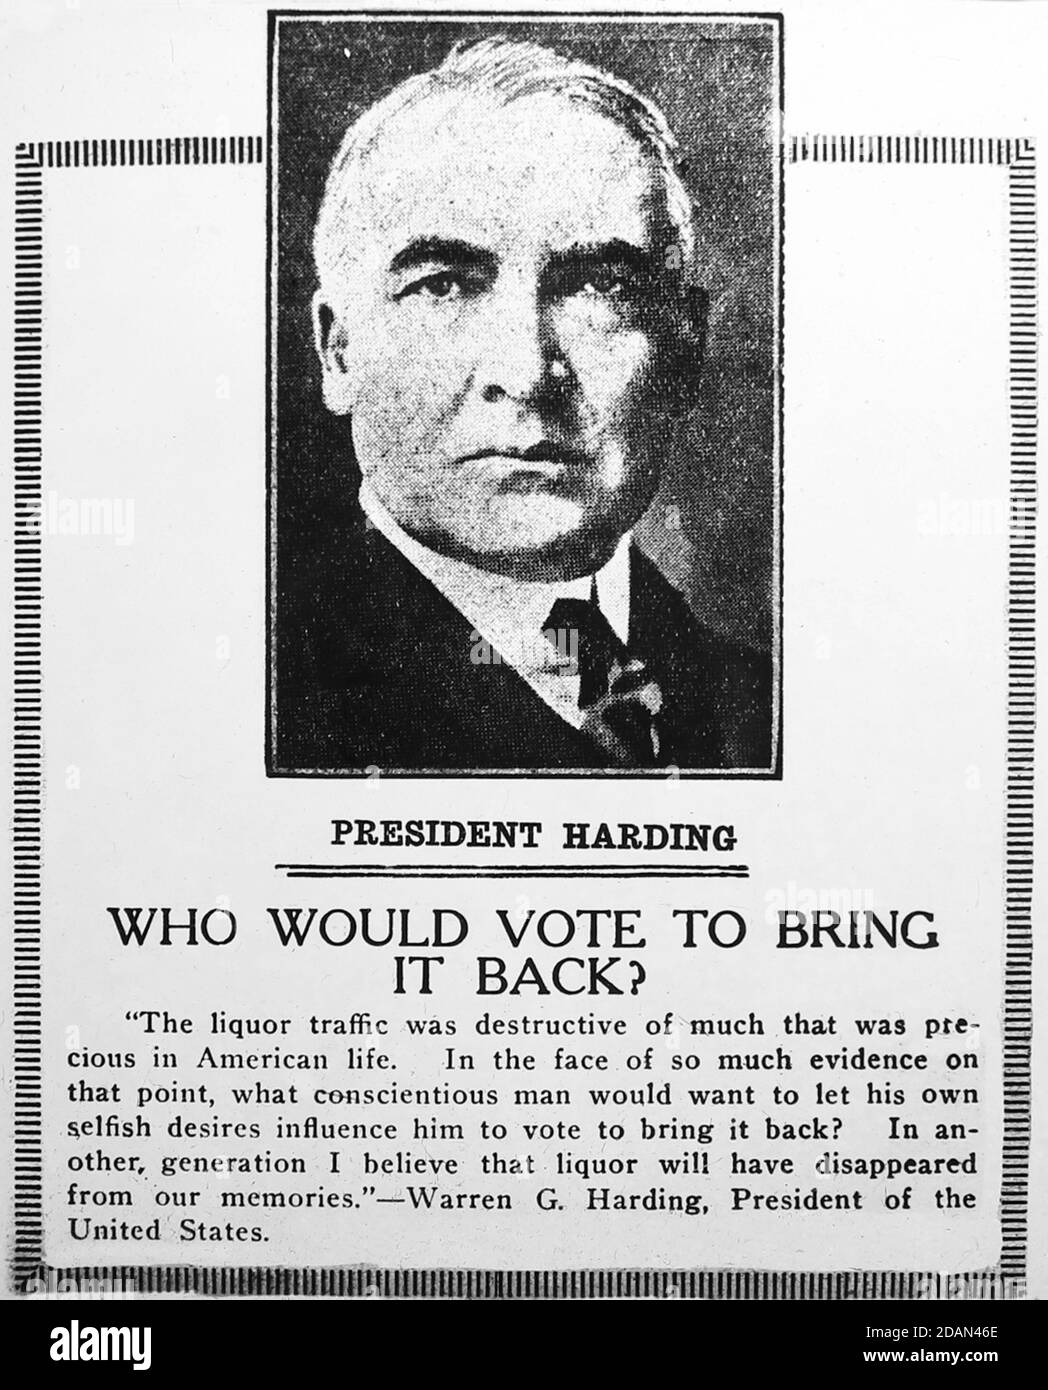 President Harding Prohibition message, probably 1920s Stock Photo